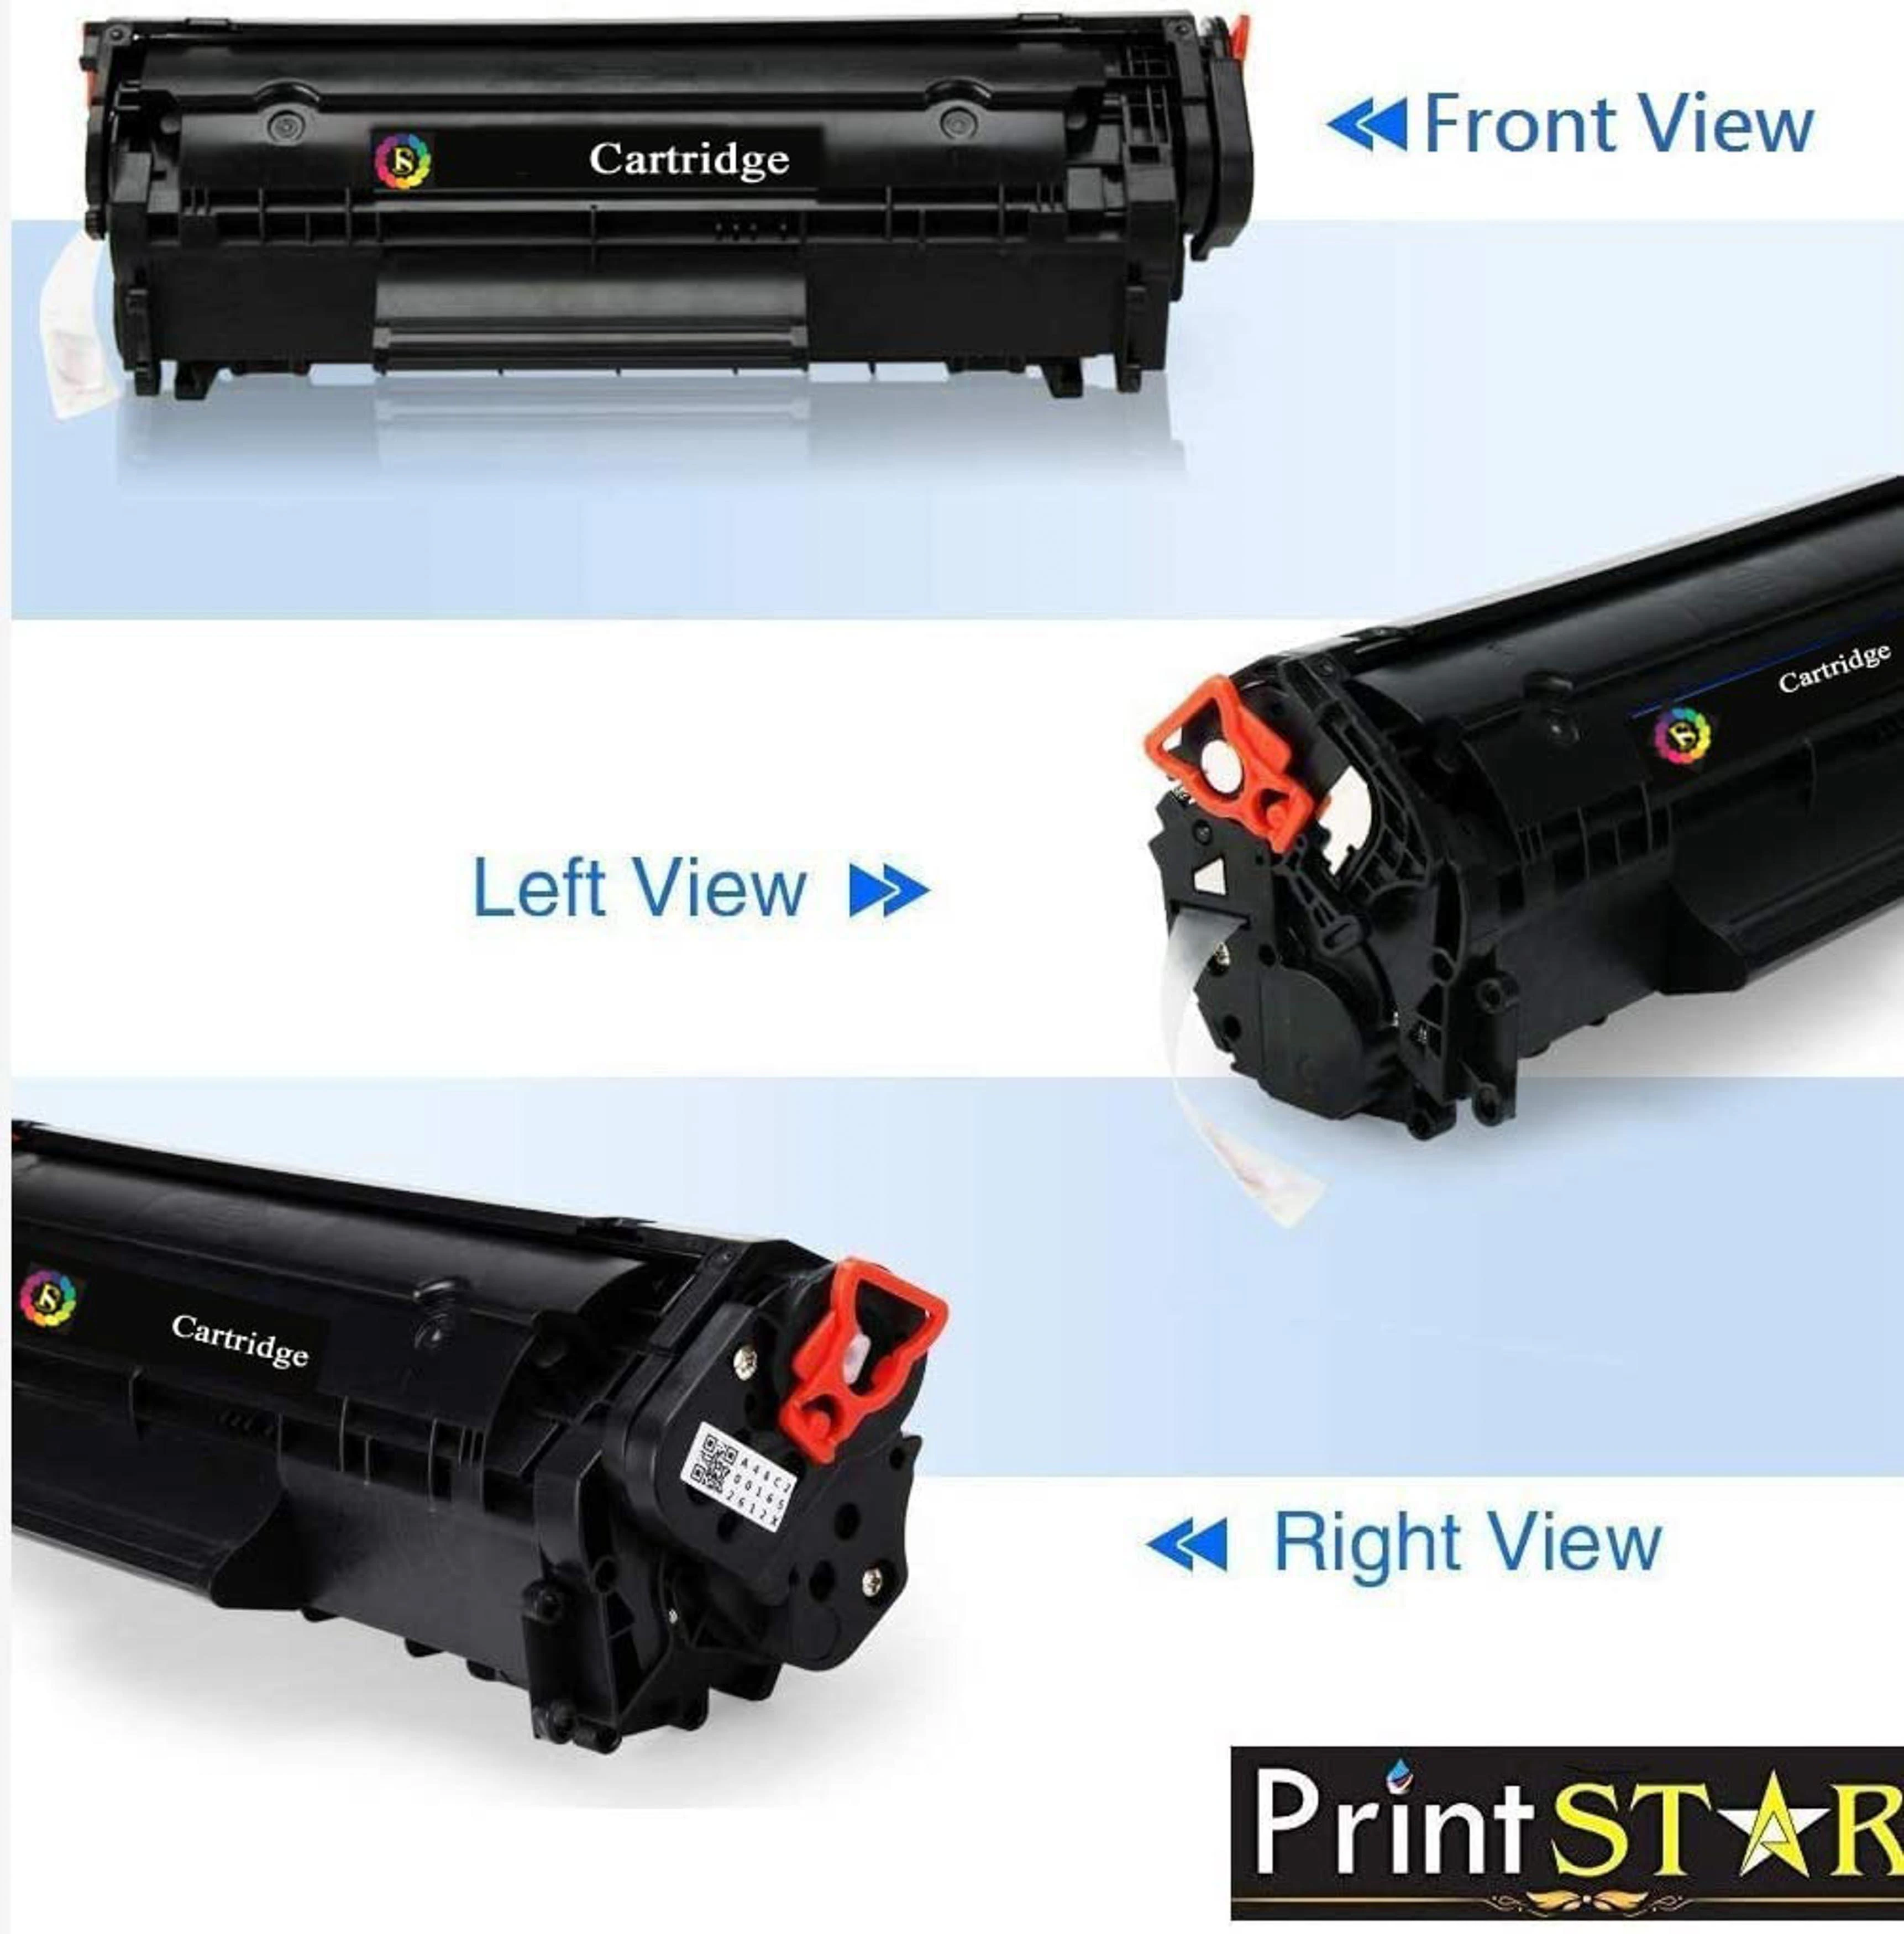 Buy Print Star 85A/285A Compatible with Toner Cartridge for HP